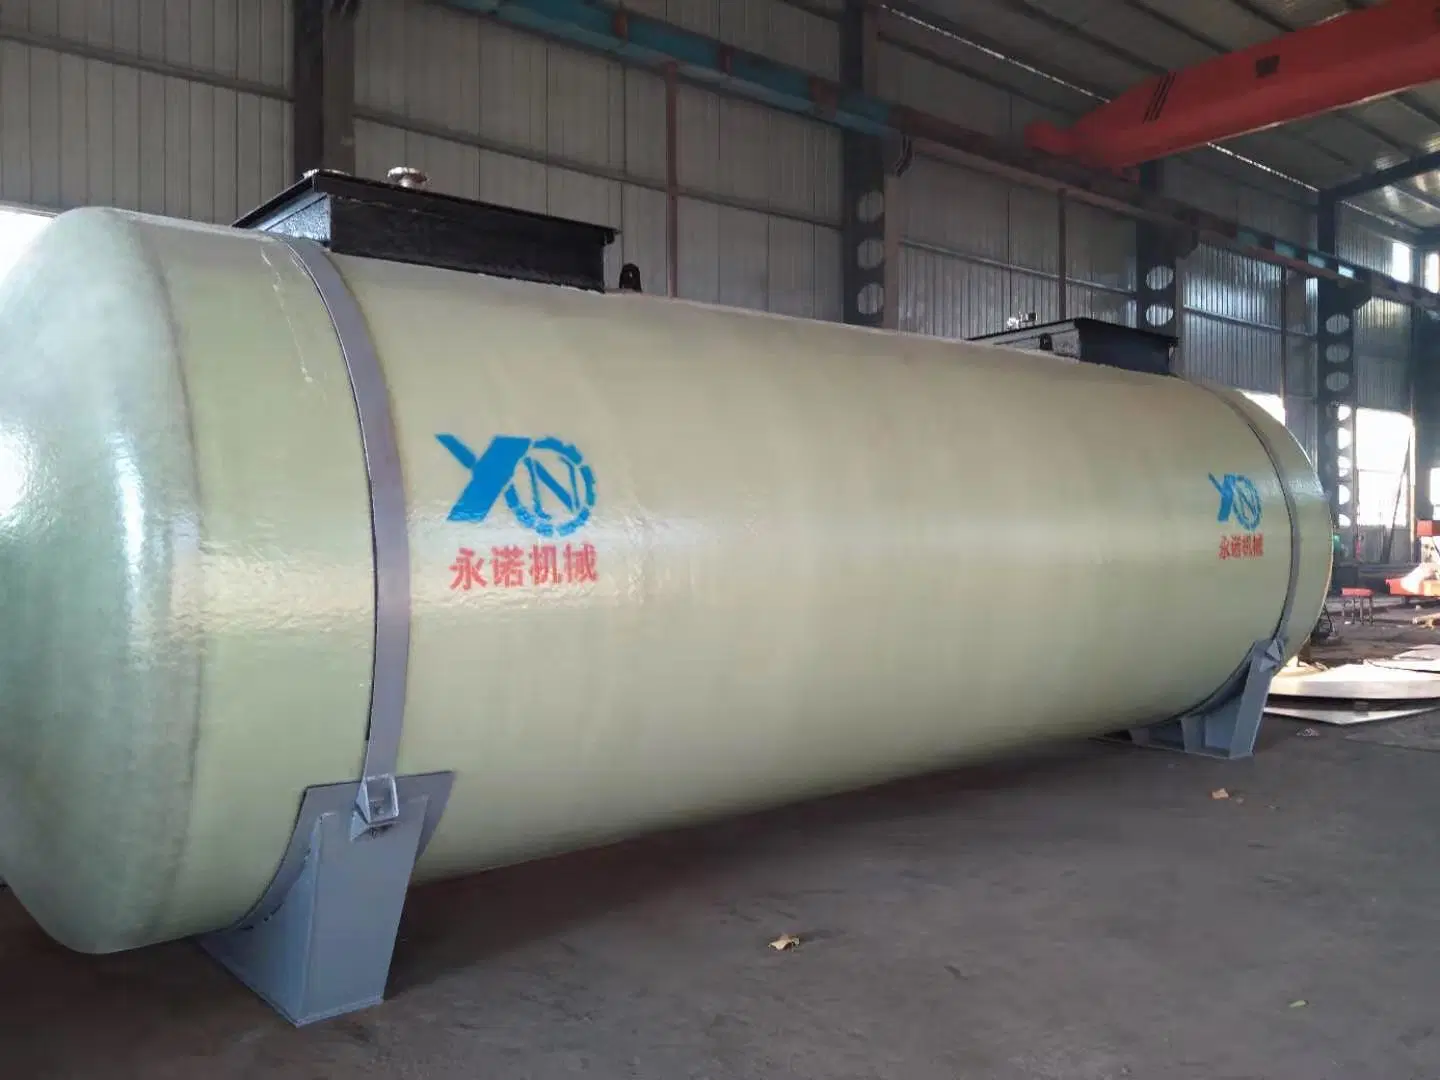 High Quality Underground Double Walled Ss Sf Diesel Gas Fuel Tank